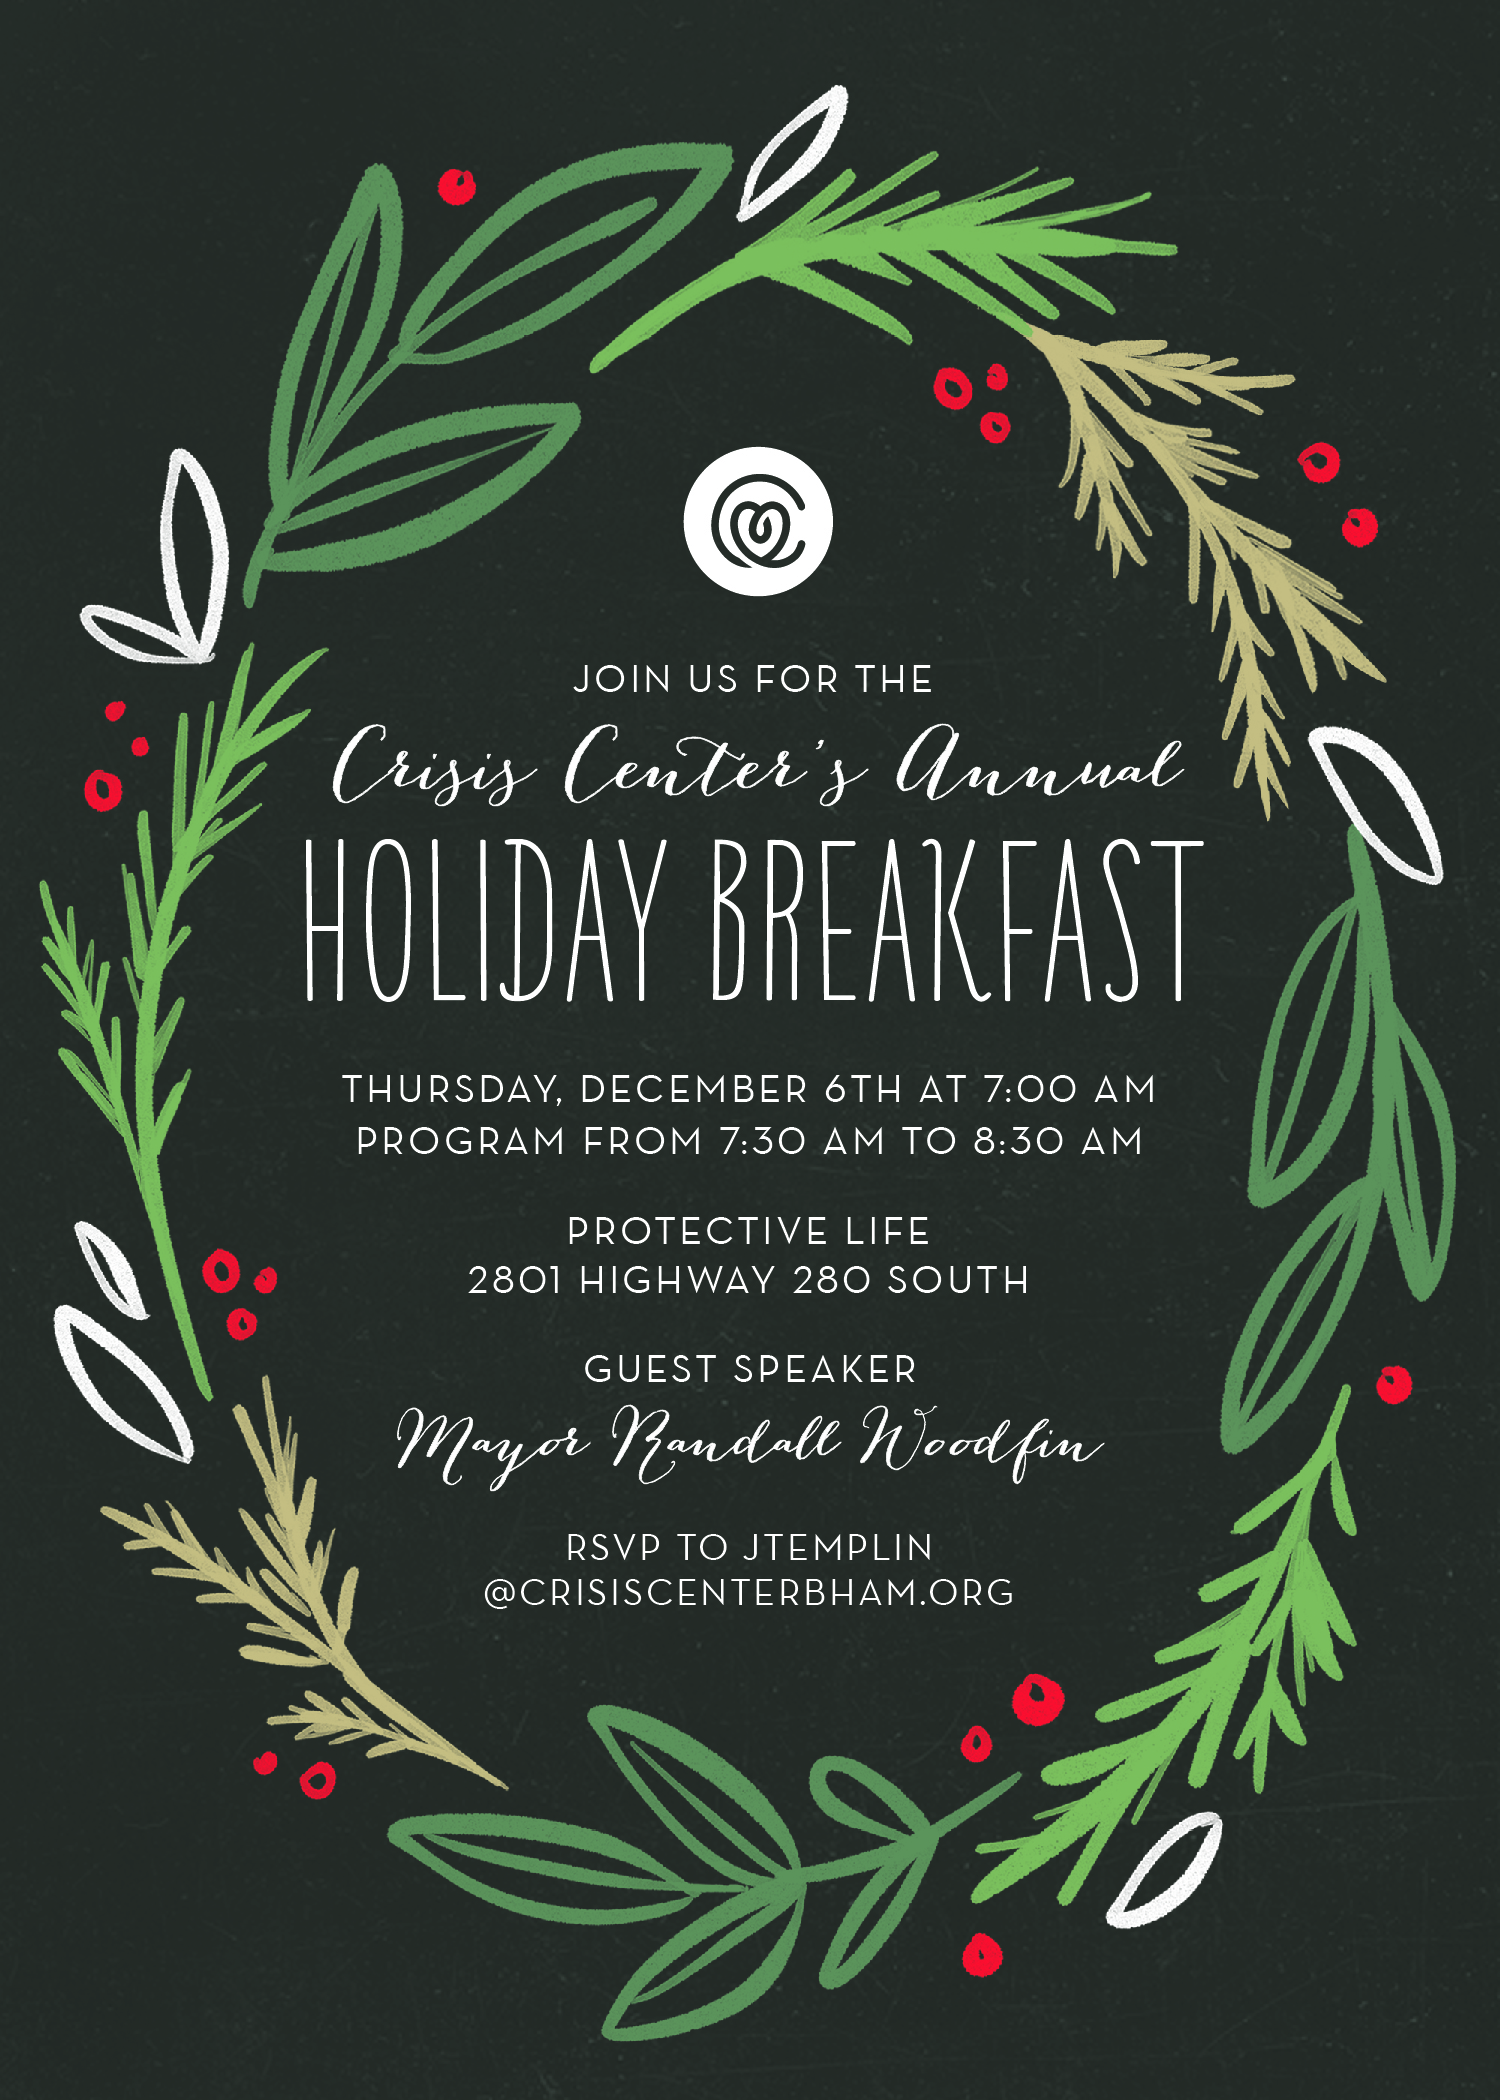 Breakfast Invitation Join Mayor Woodfin Dec. 6th at The Crisis Center's holiday breakfast